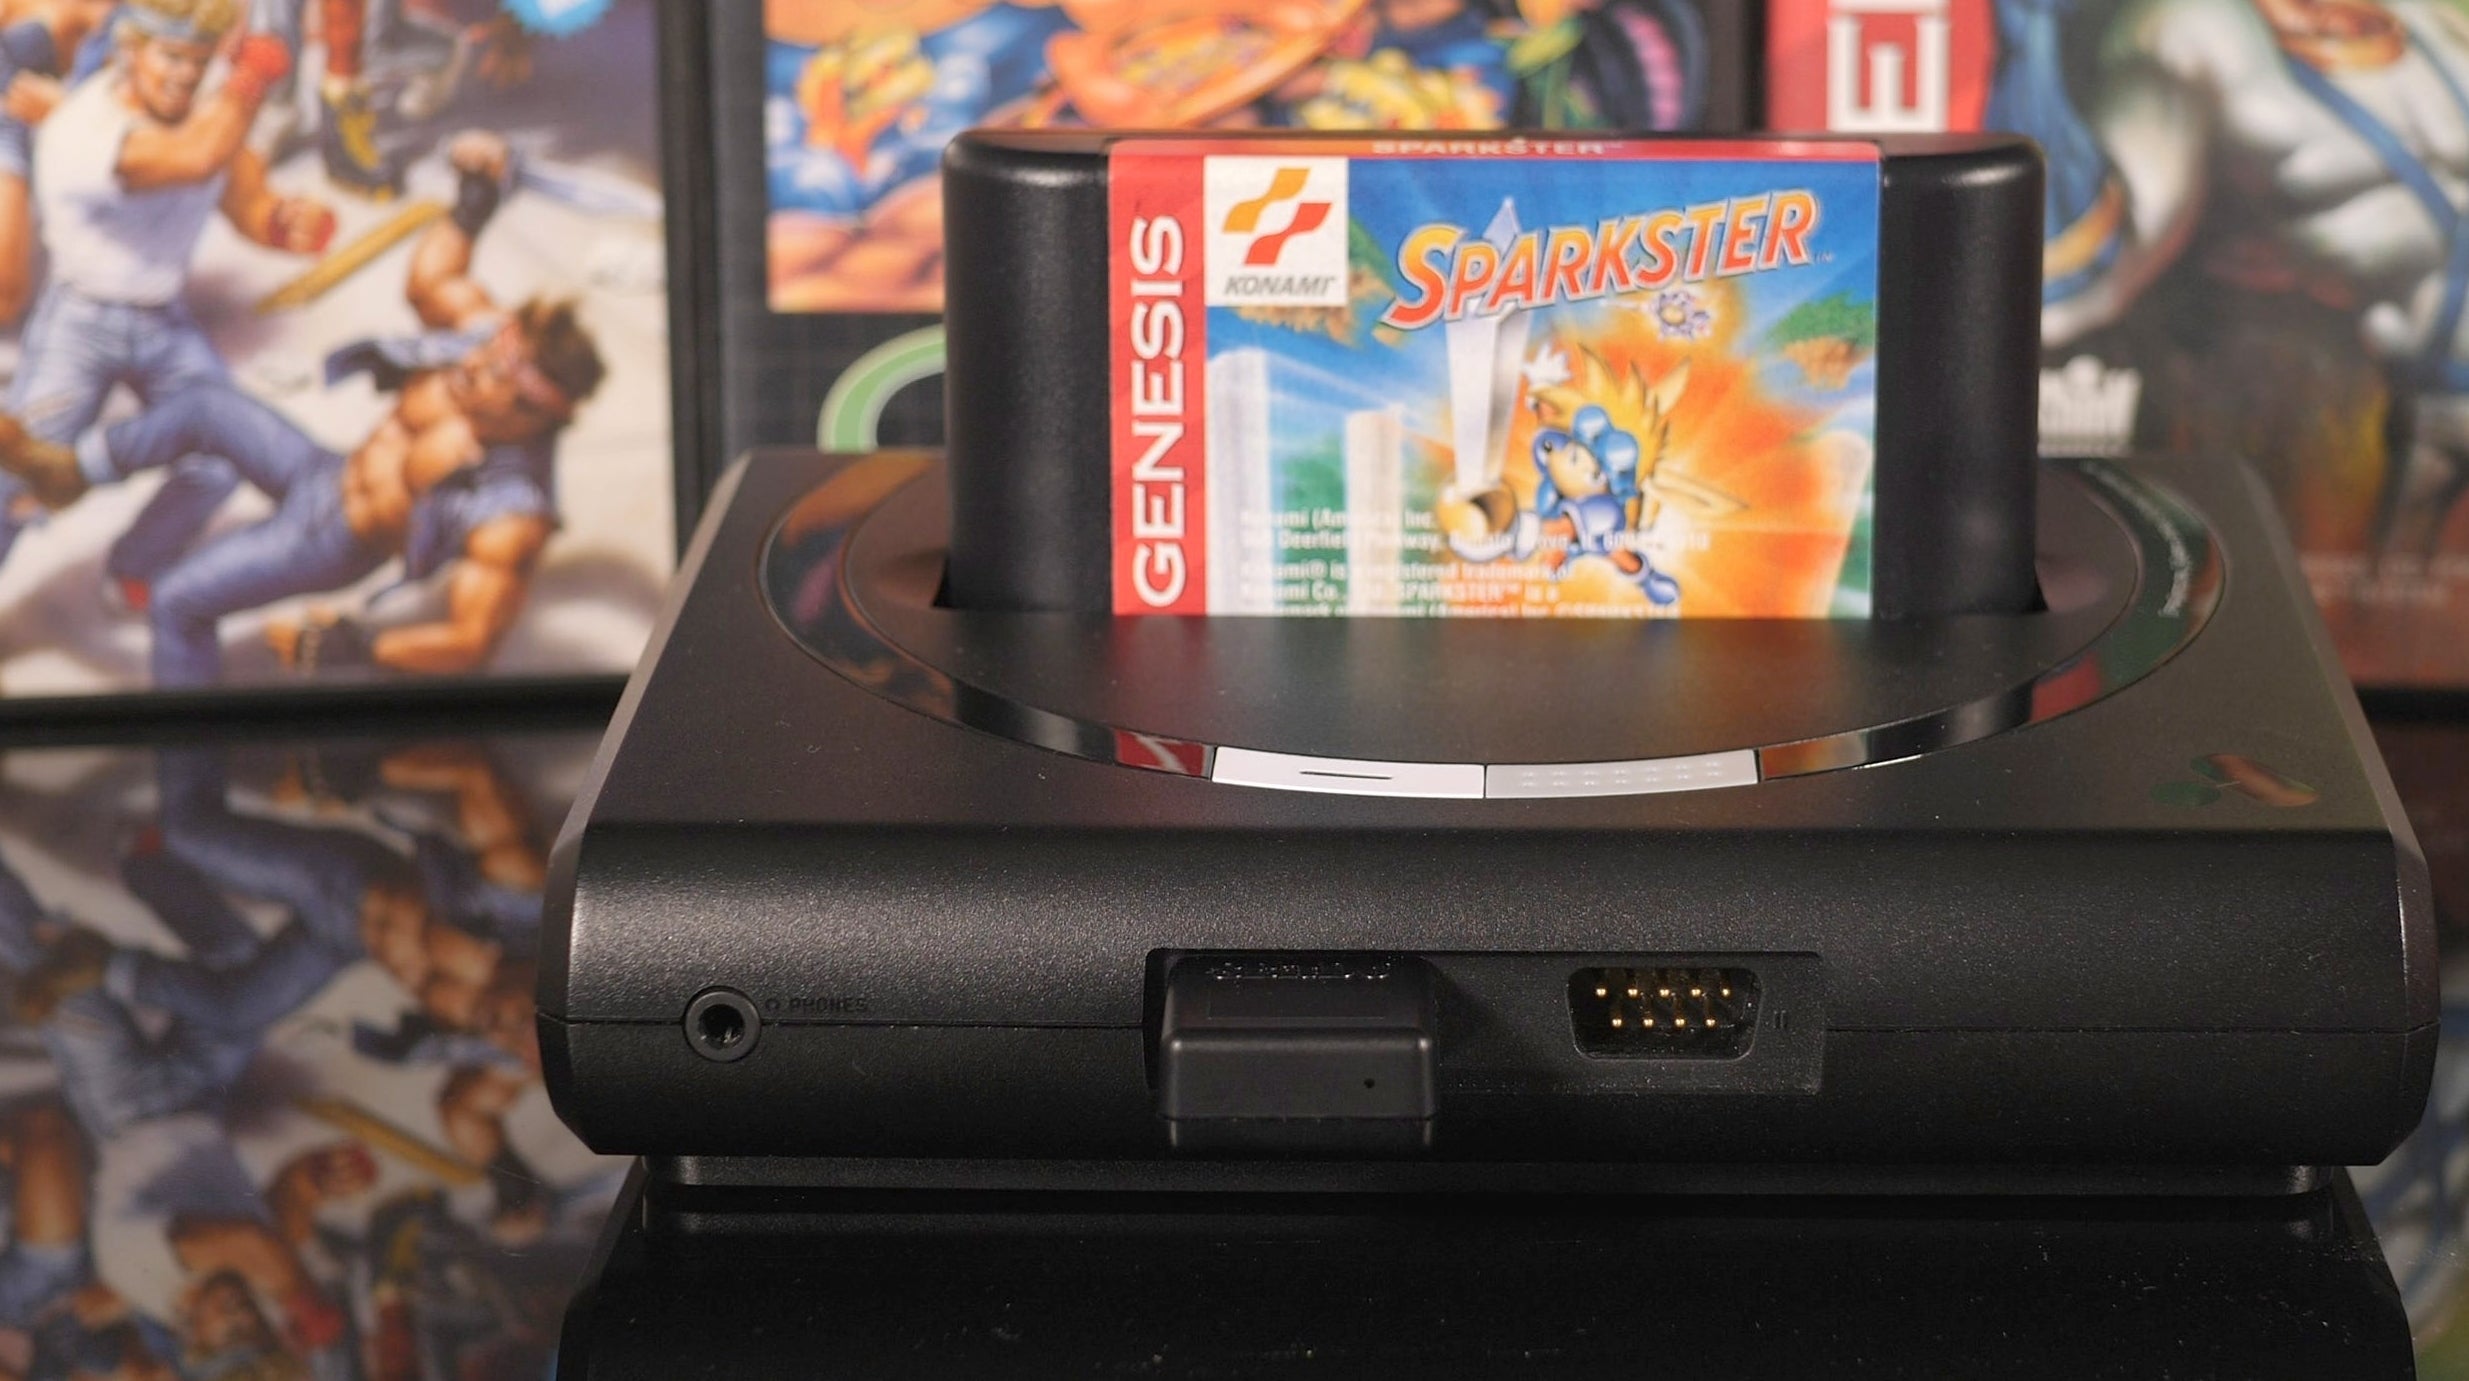 Analogue Mega Sg review: the best Mega Drive clone for flat